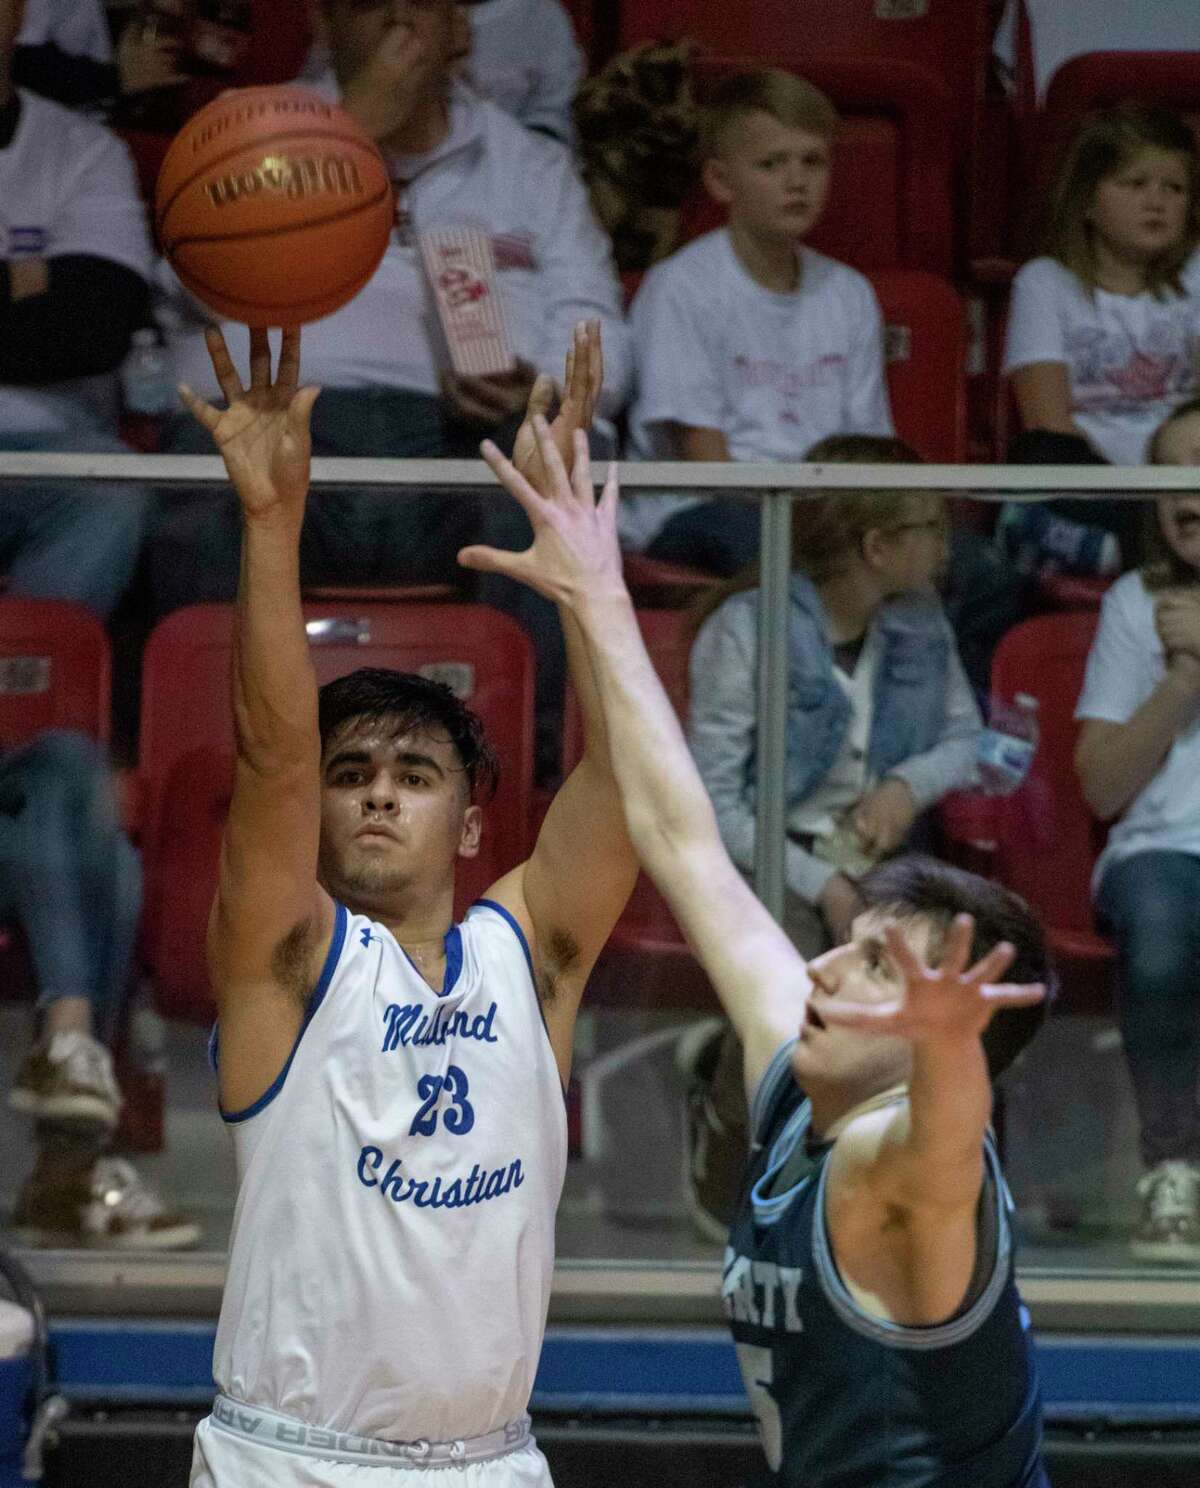 Midland Christian's Giovanni Lujan puts up a 3-point shot before Argyle Liberty's Kason Simpson can get over to defend 01/21/2022 at the McGraw Event Center. Tim Fischer/Reporter-Telegram